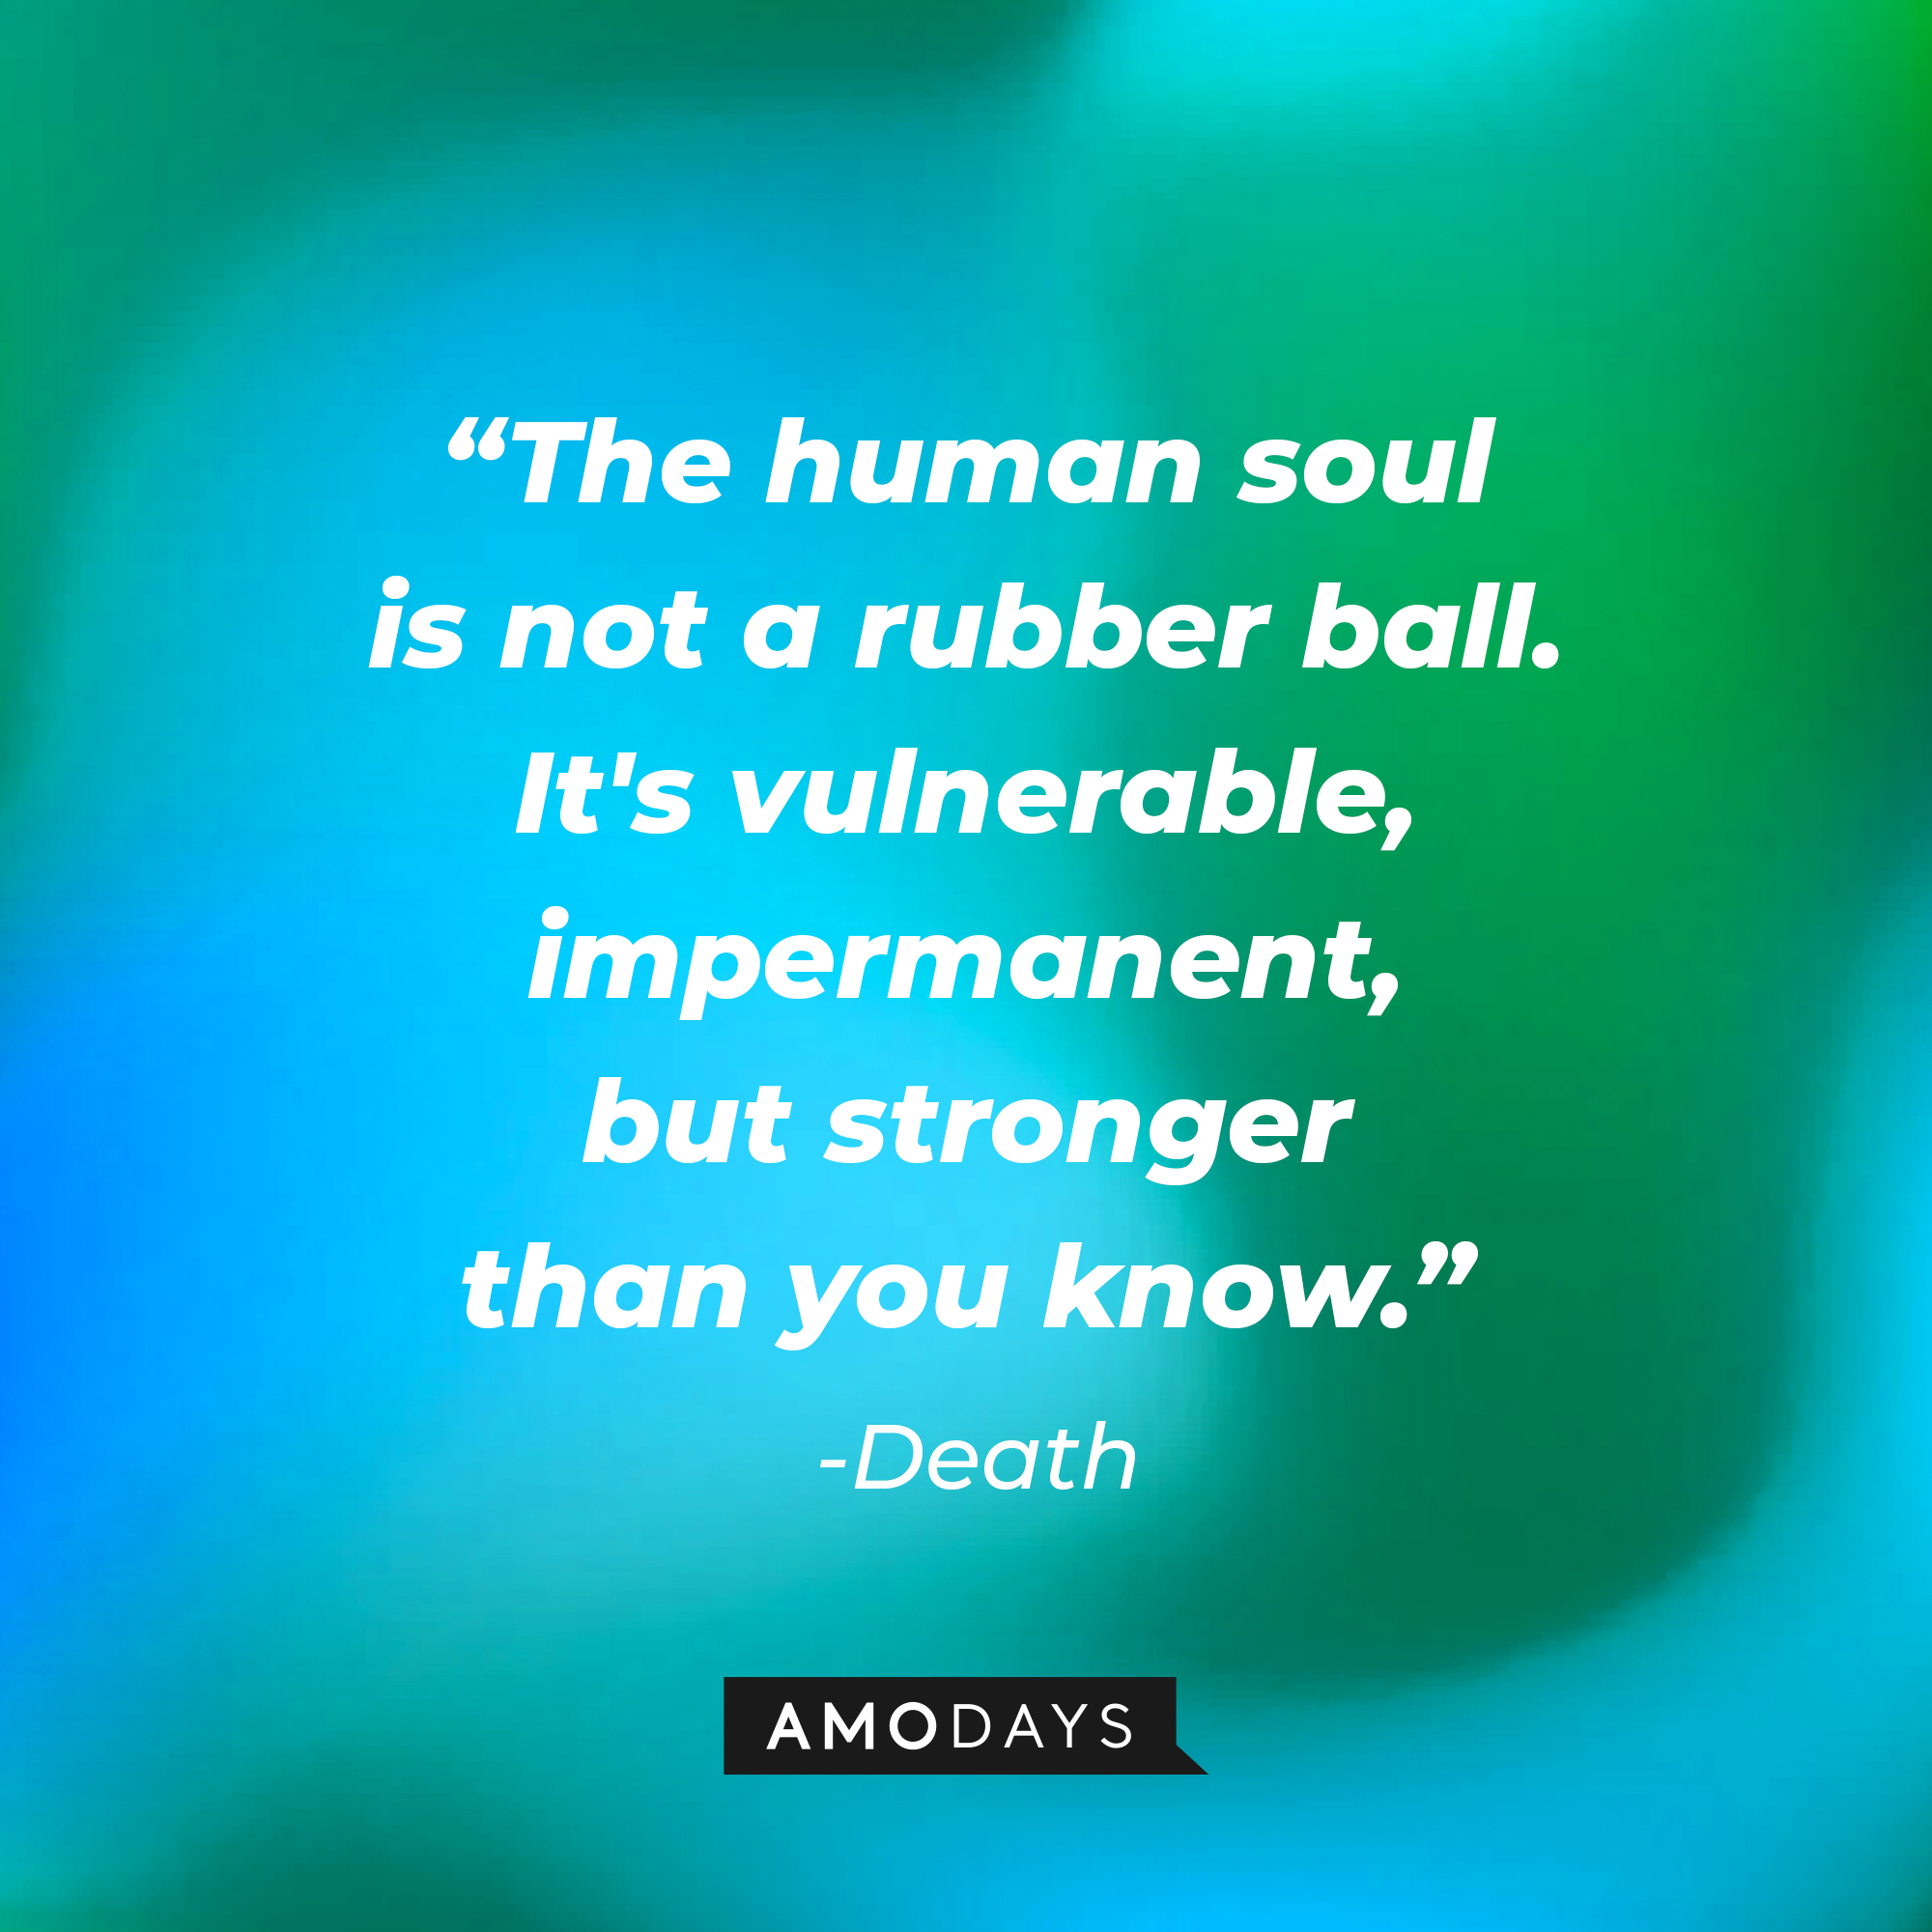 Death’s quote: "The human soul is not a rubber ball. It's vulnerable, impermanent, but stronger than you know.” | Source: AmoDays